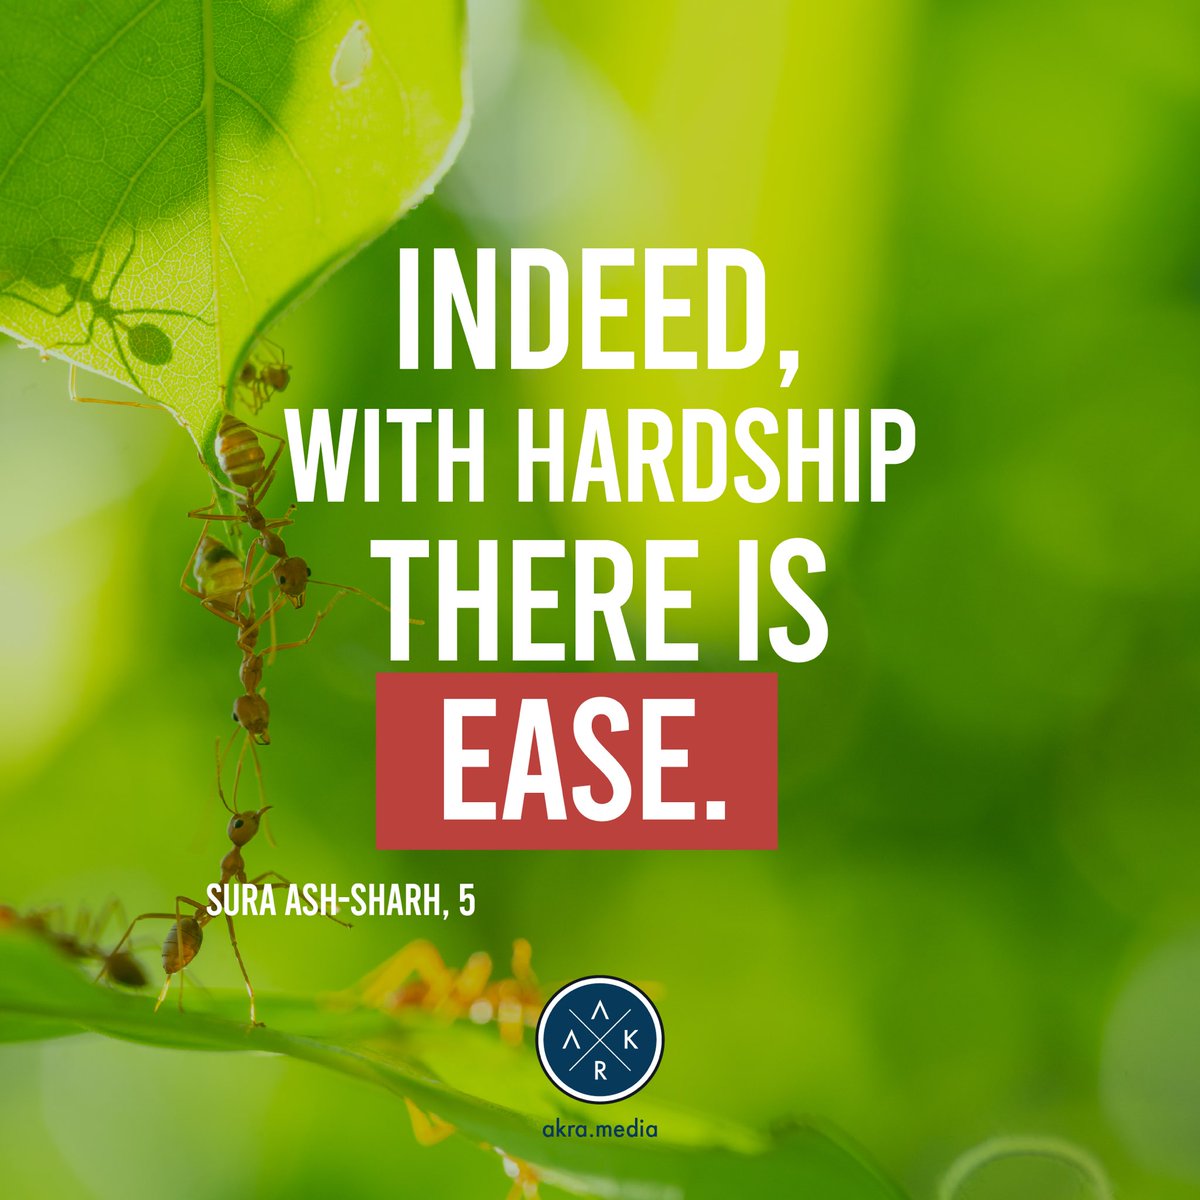 “Indeed, with hardship there is ease.”
Sura Ash-Sharh, 5

#thequran #suraashsharh #ashsharh #islam #islamicquotes #hardship #lifequotes #challenge #inspirationalquotes #innerpeace #faith